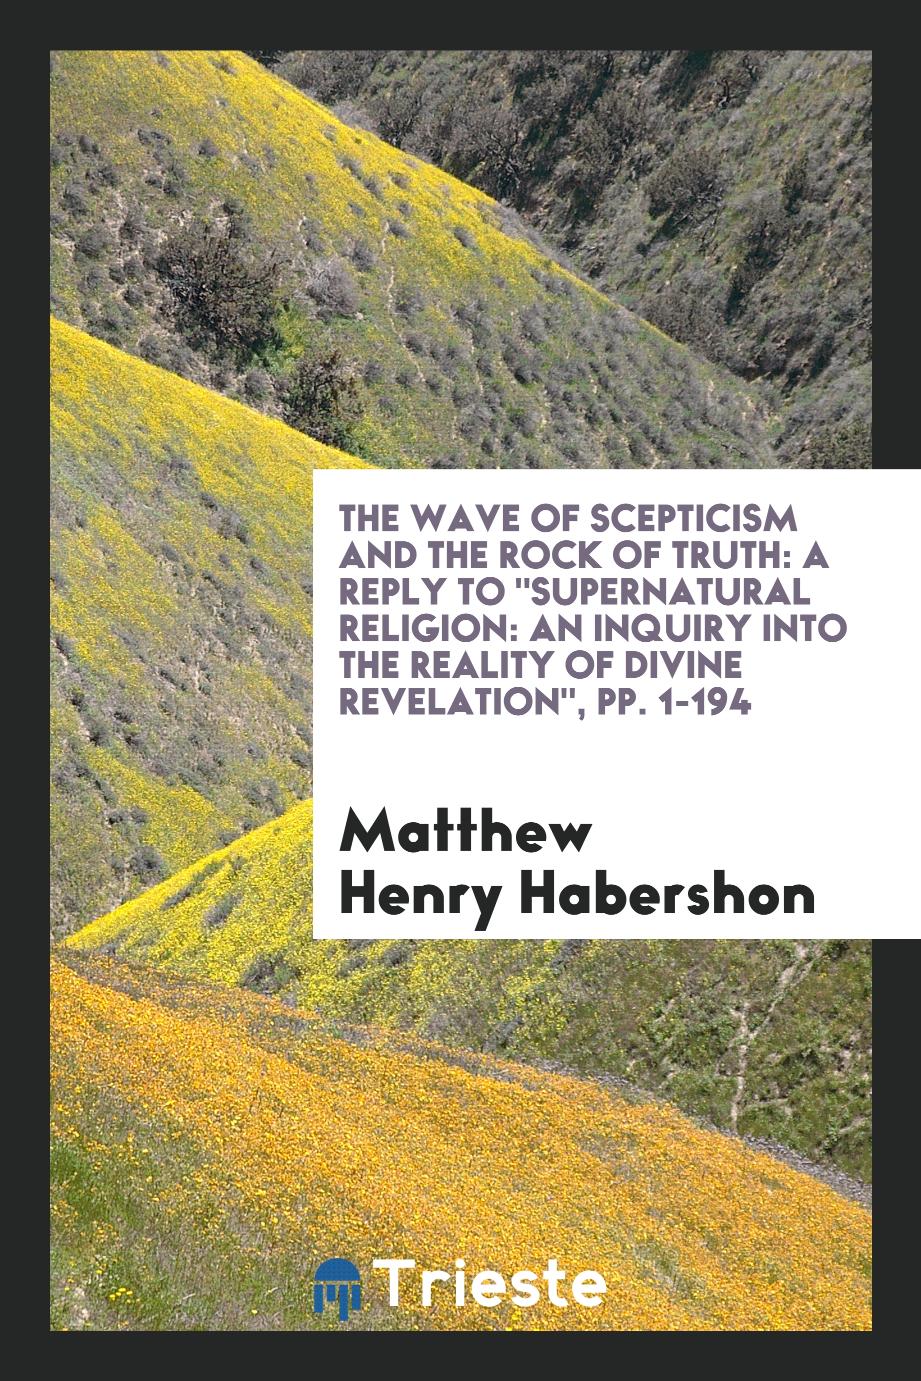 The Wave of Scepticism and the Rock of Truth: A Reply to "Supernatural Religion: An Inquiry into the Reality of Divine Revelation", pp. 1-194